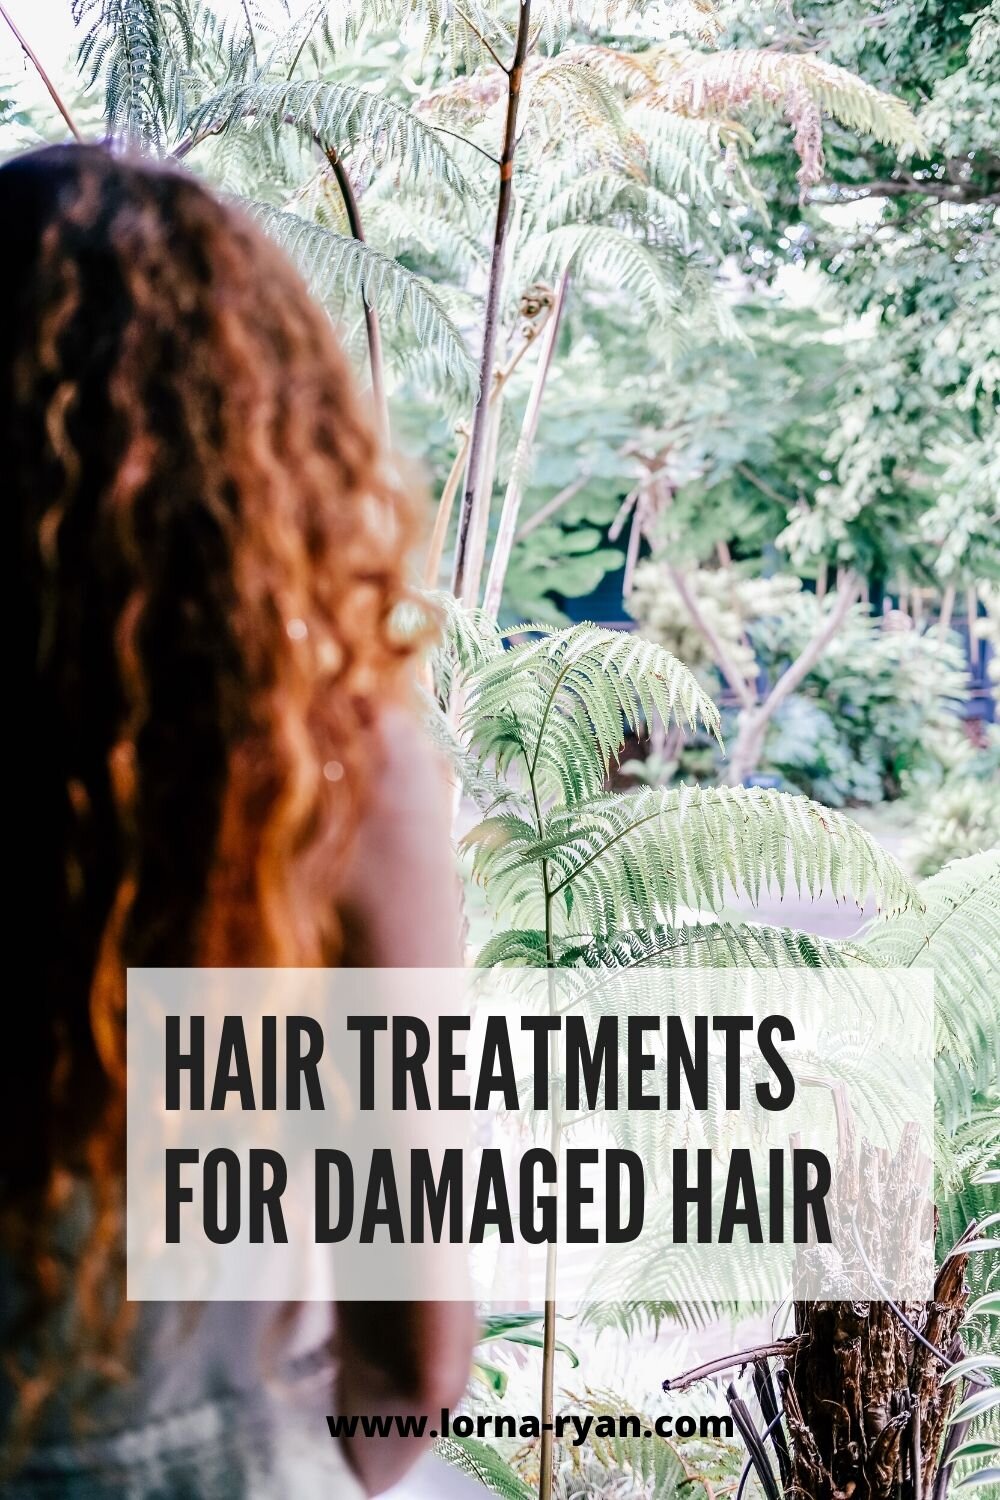 The best hair products for damaged hair repair. Deep conditioning treatments for dry hair, damaged hair or bleached hair to make it healthy again!